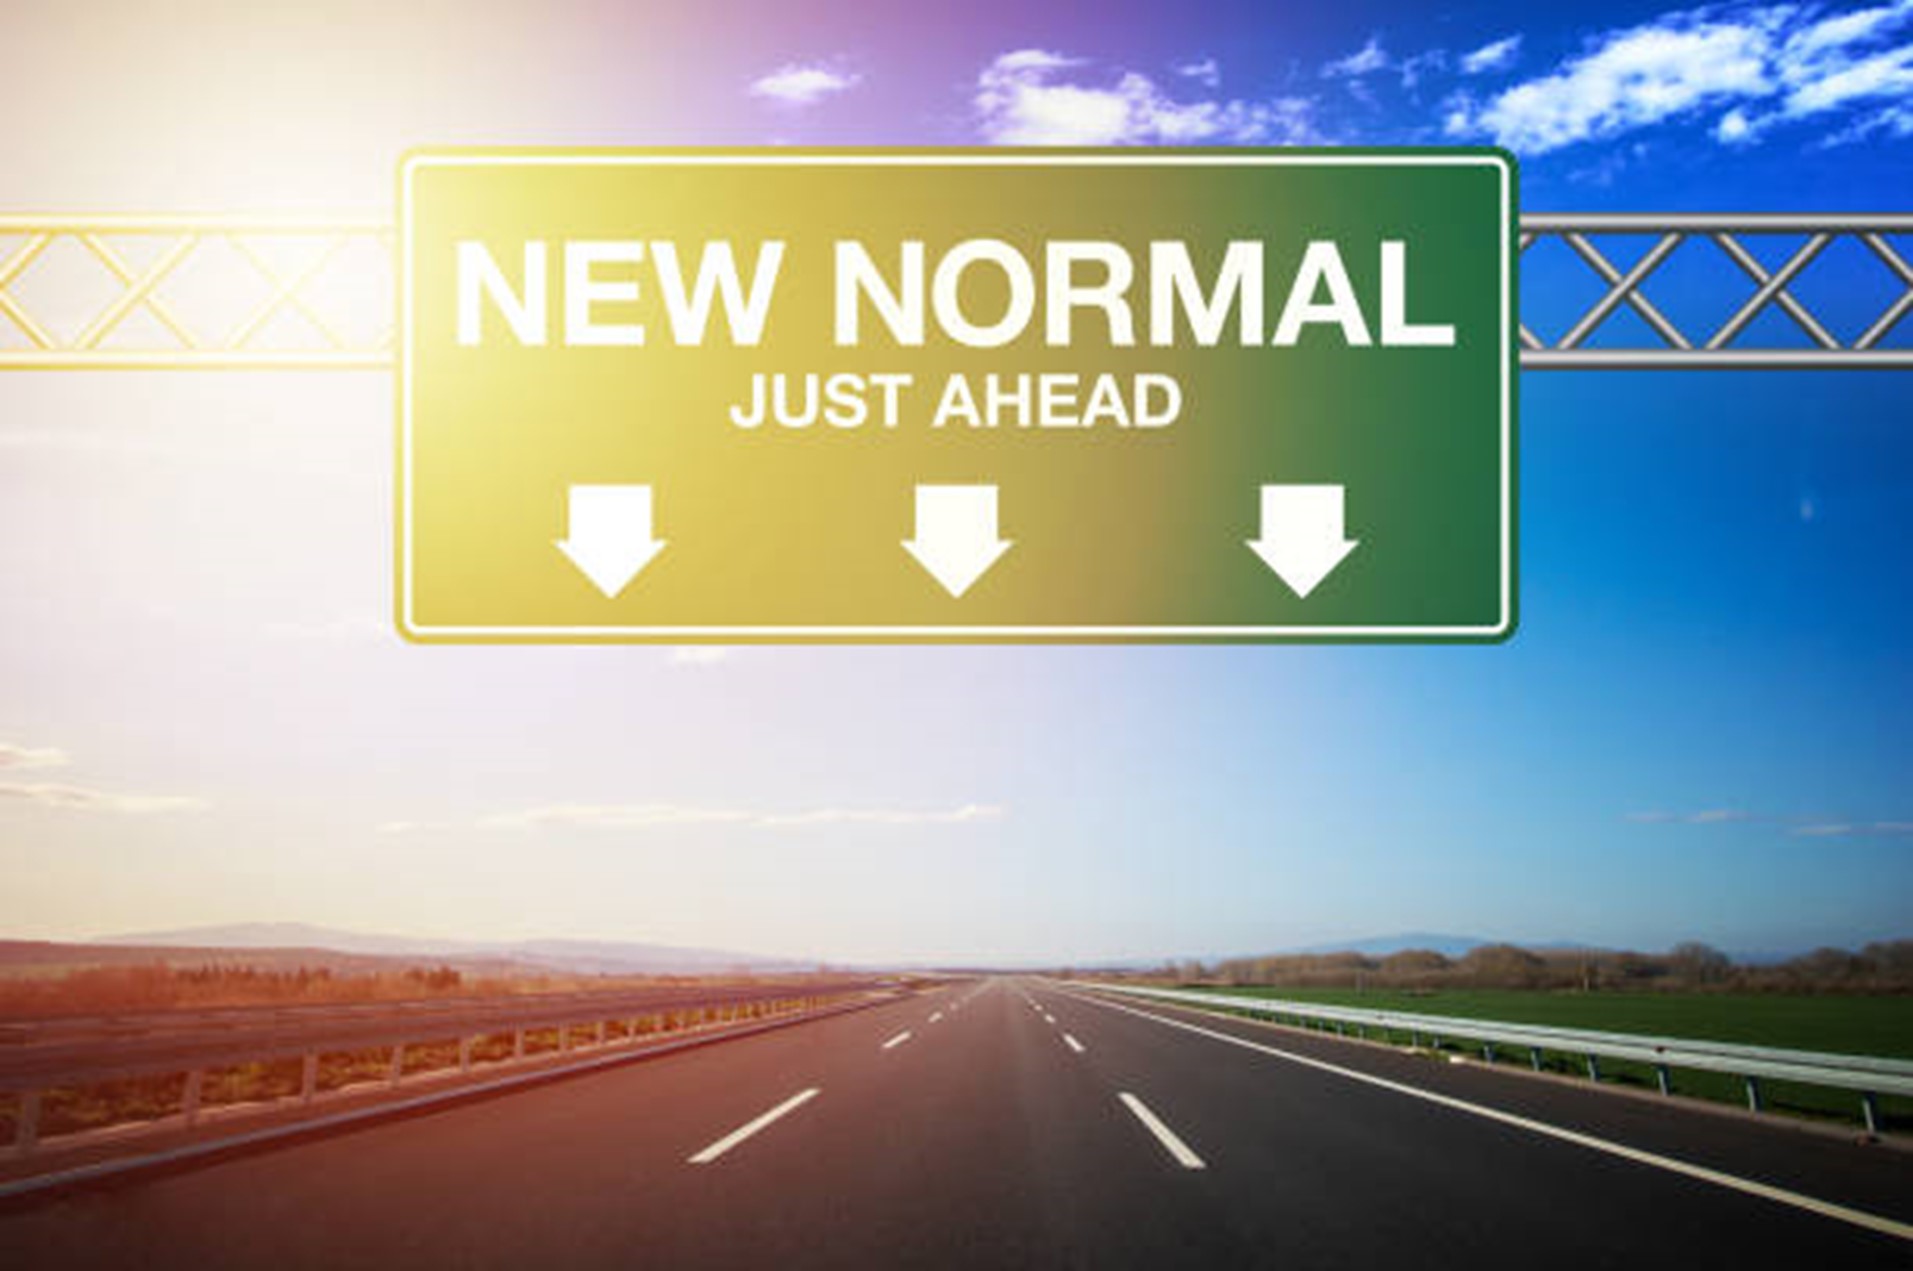 Entering the “New Normal”: Are We Easing COVID-19 Restrictions Too Soon?